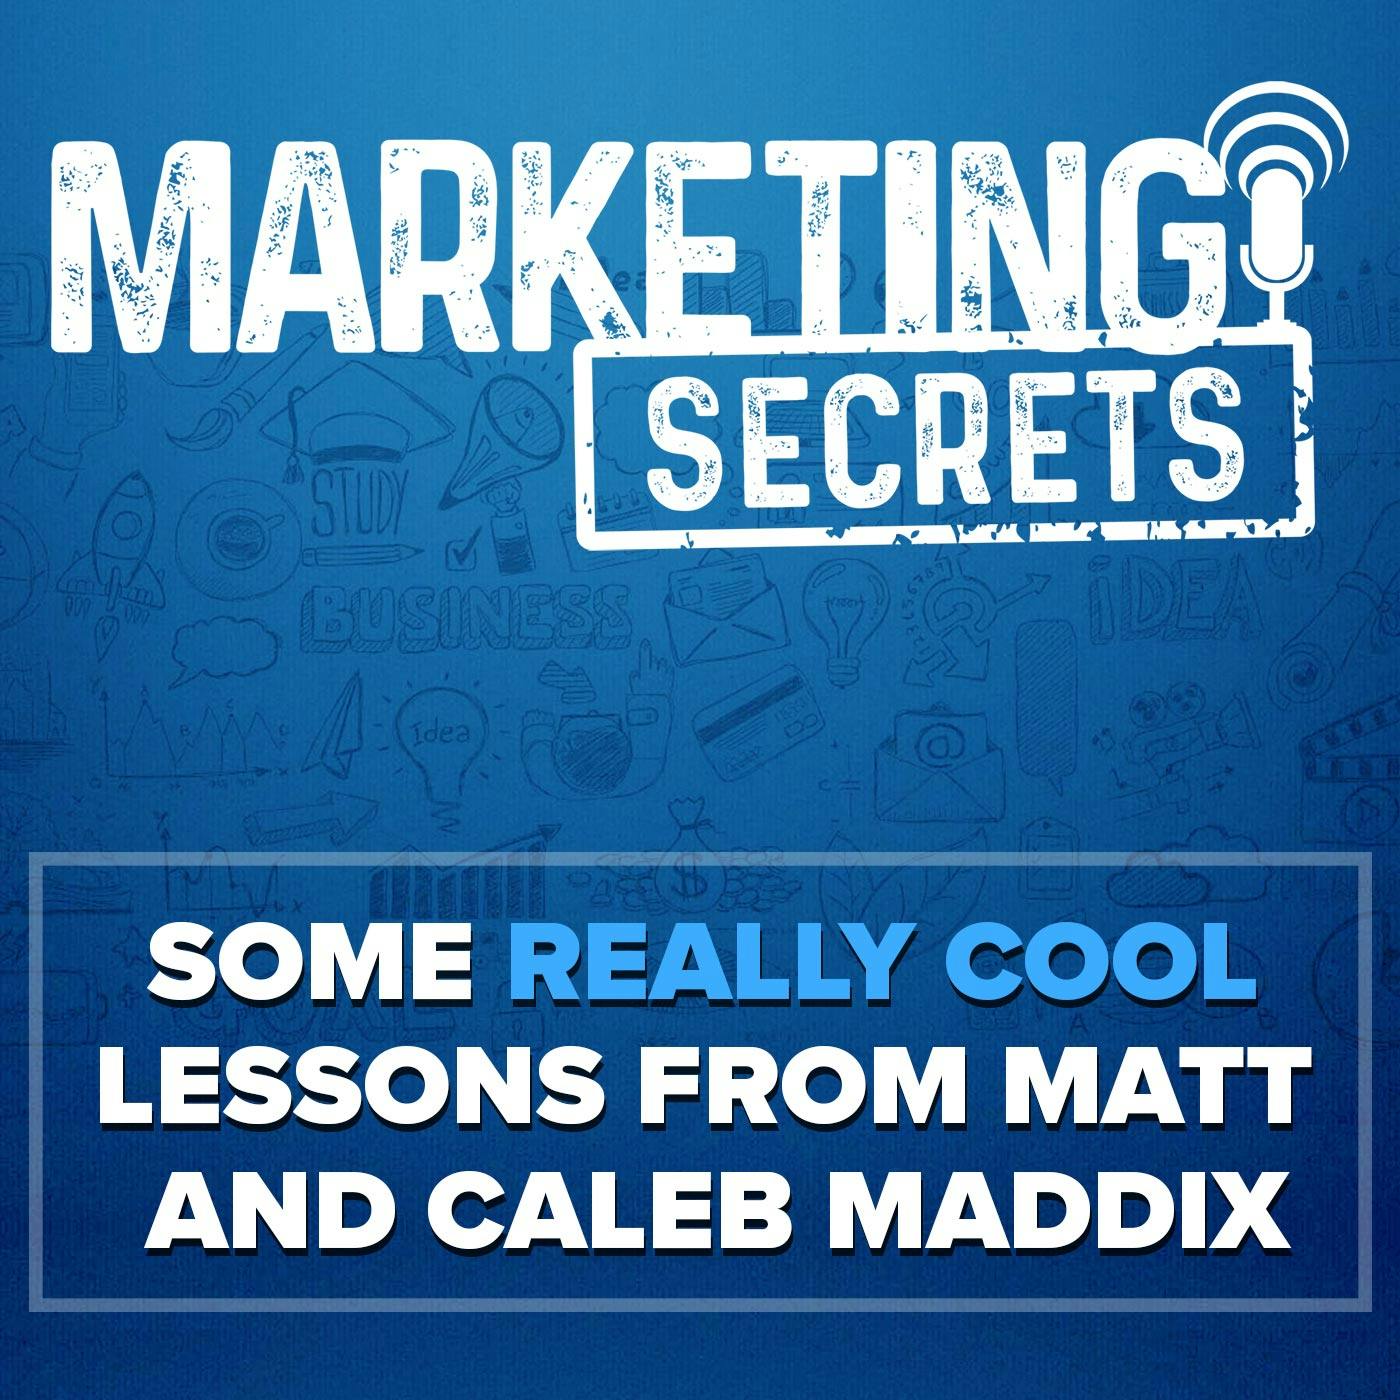 Some Really Cool Lessons From Matt and Caleb Maddix